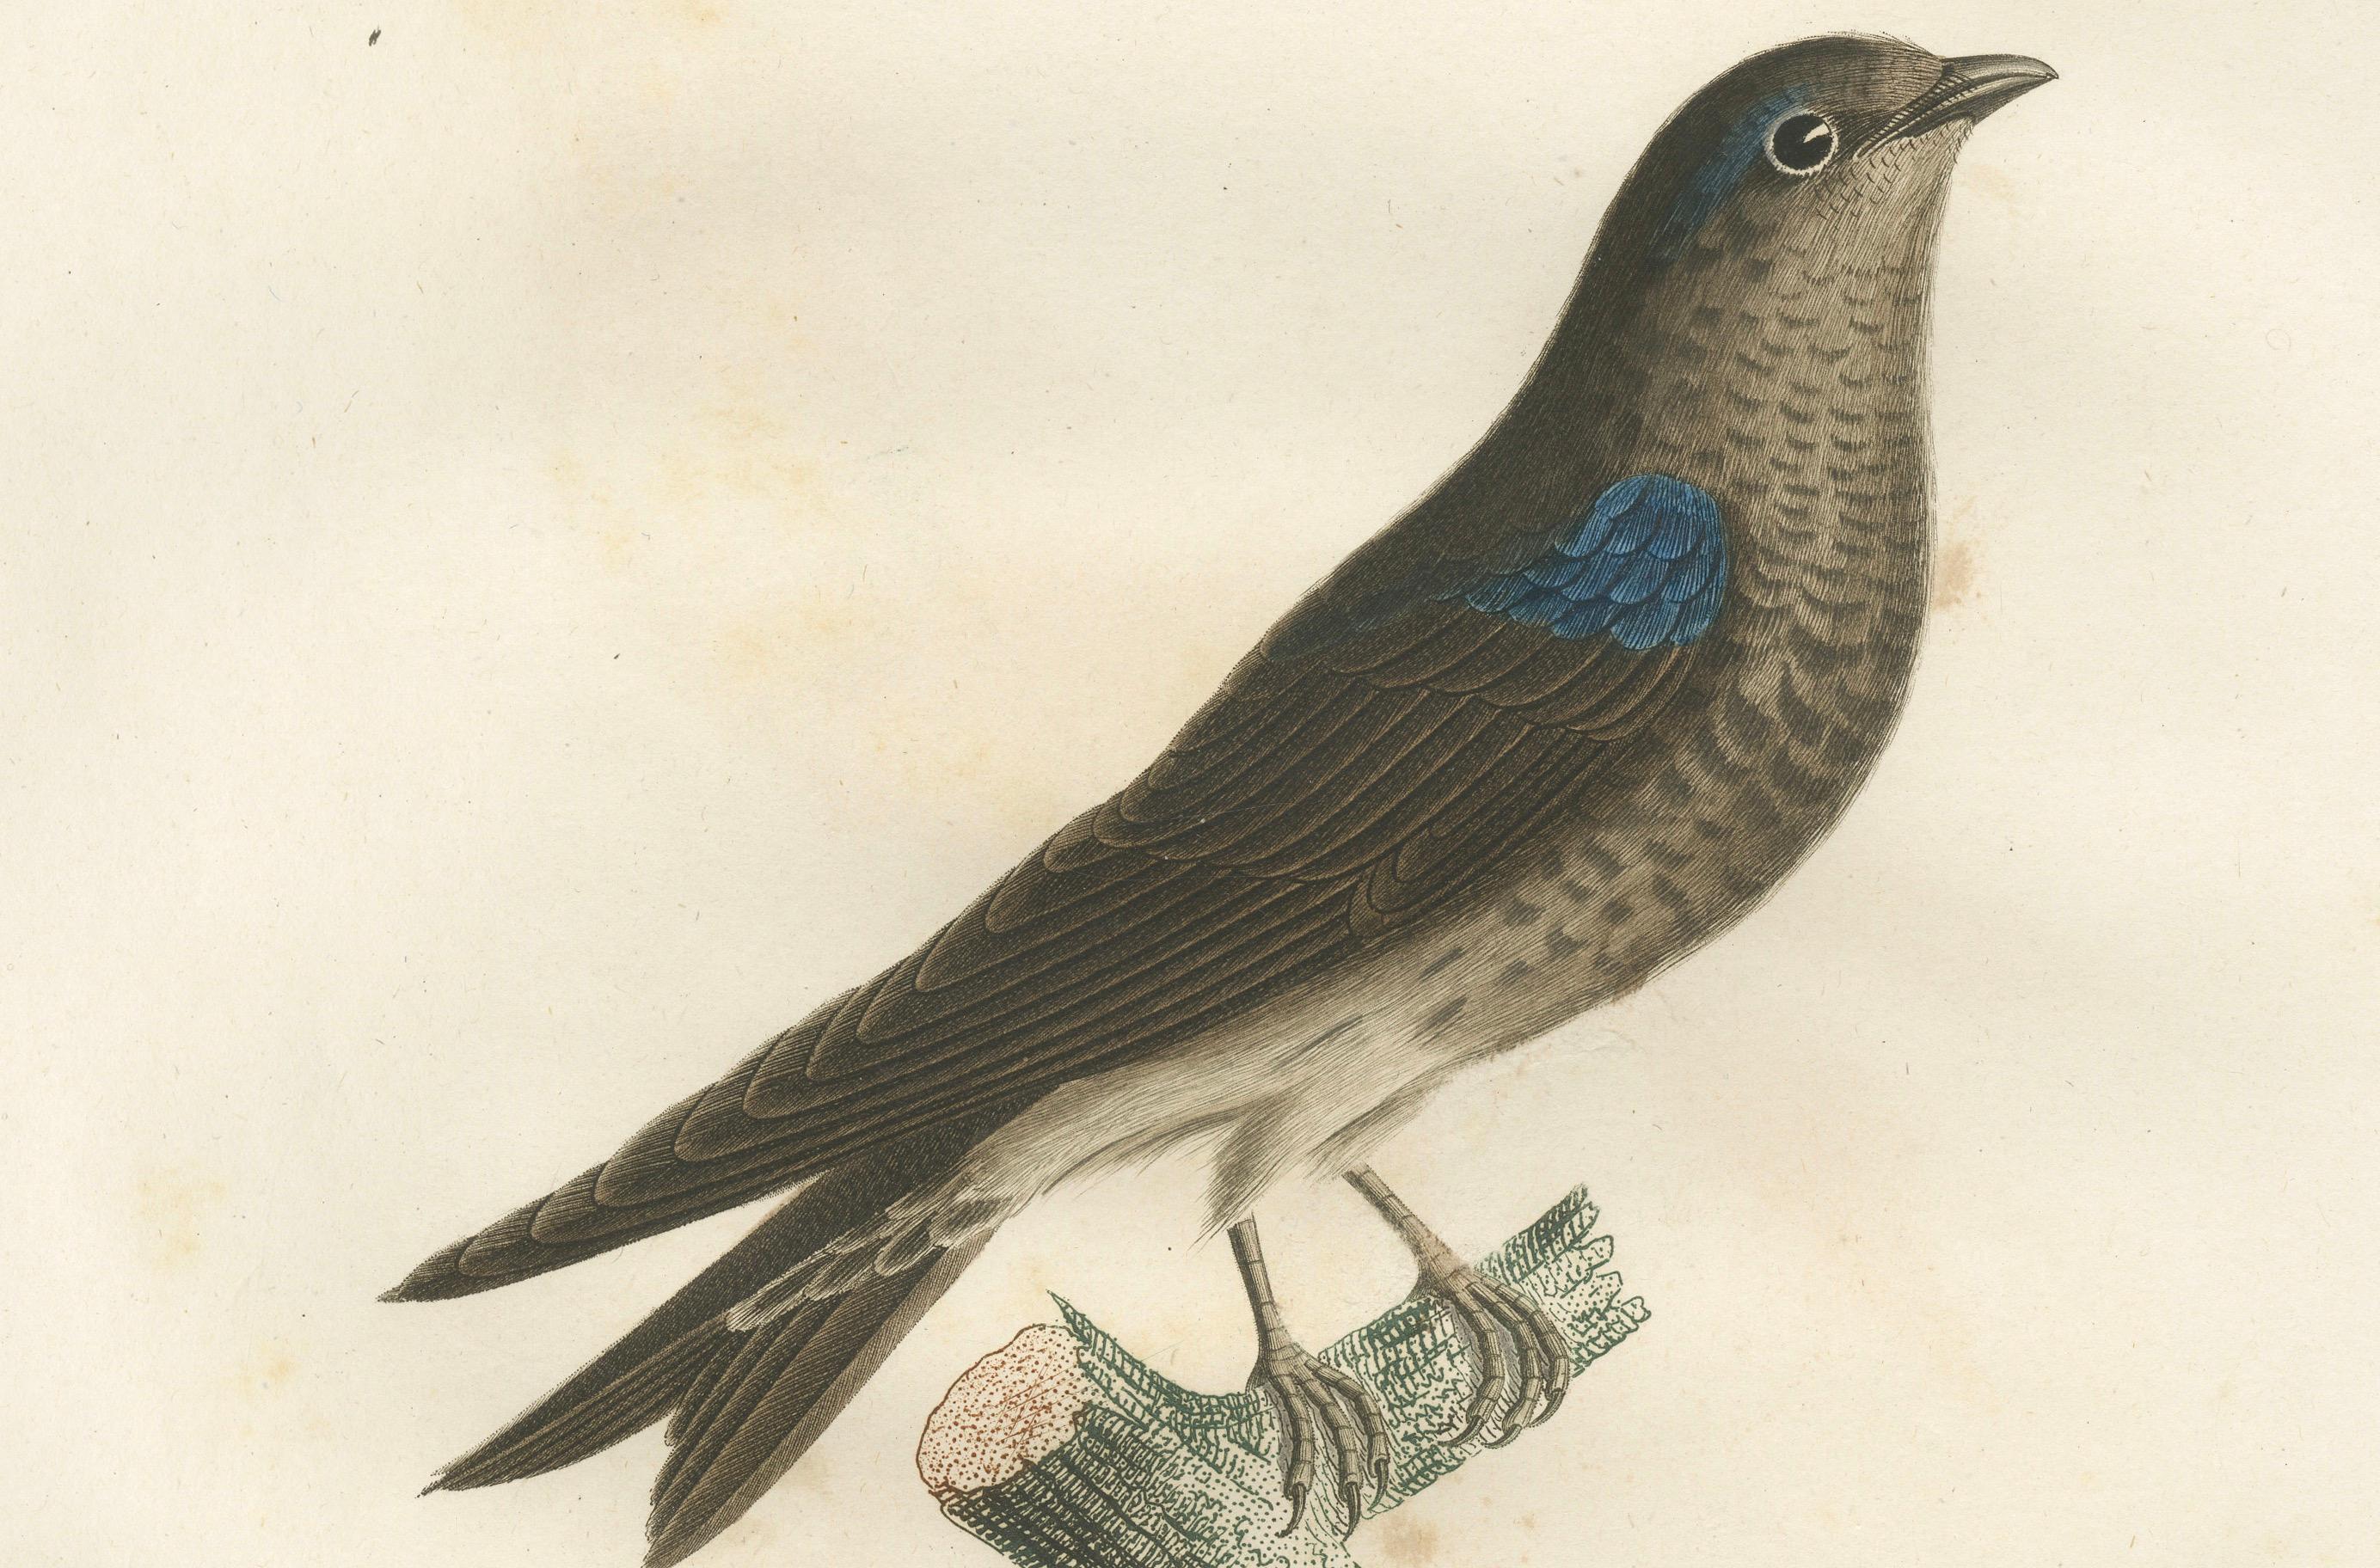 Paper Feathered Sapphire: The Blue Swallow – A Vieillot Hand-Colored Print from 1807 For Sale